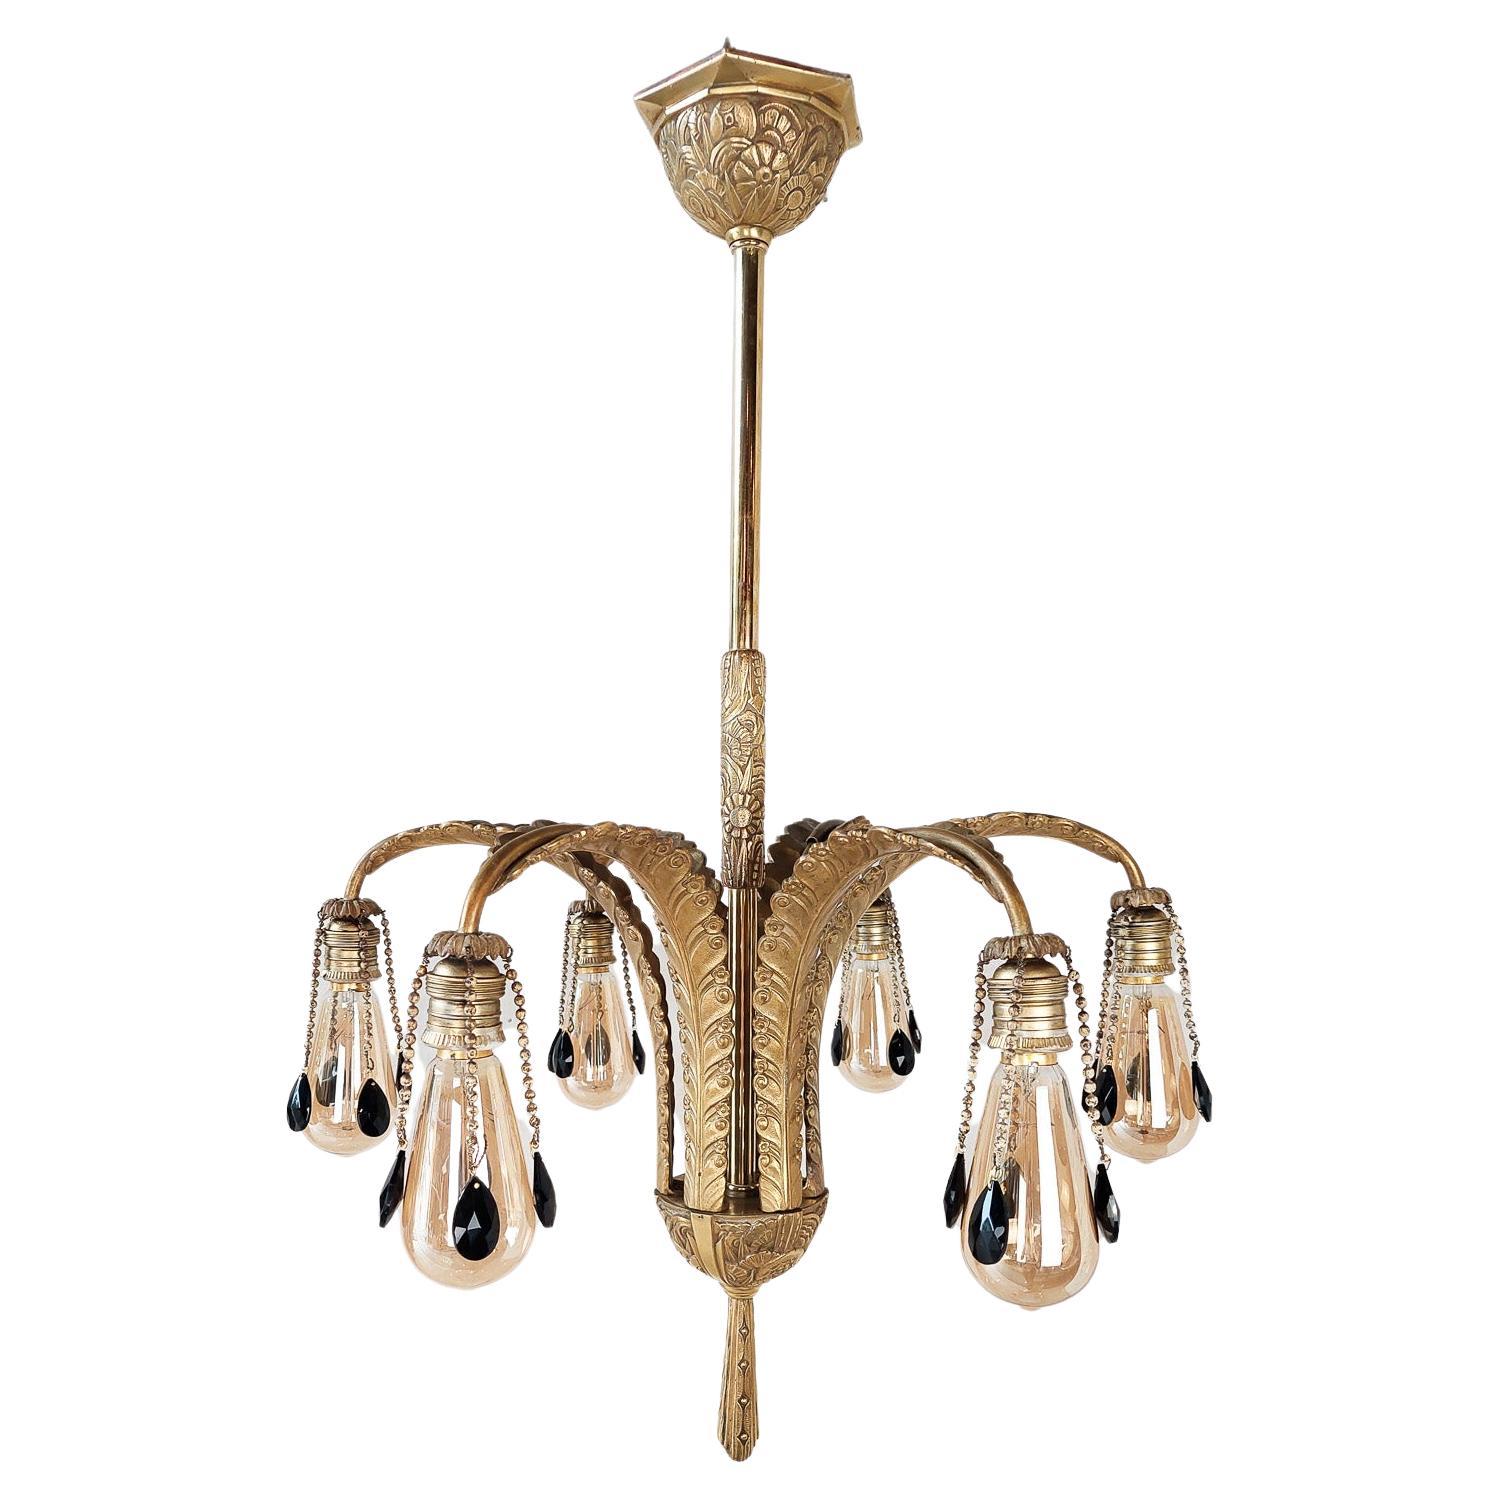 Midcentury Brass Chandelier with Feather Shaped Arms and Black Pearls For Sale